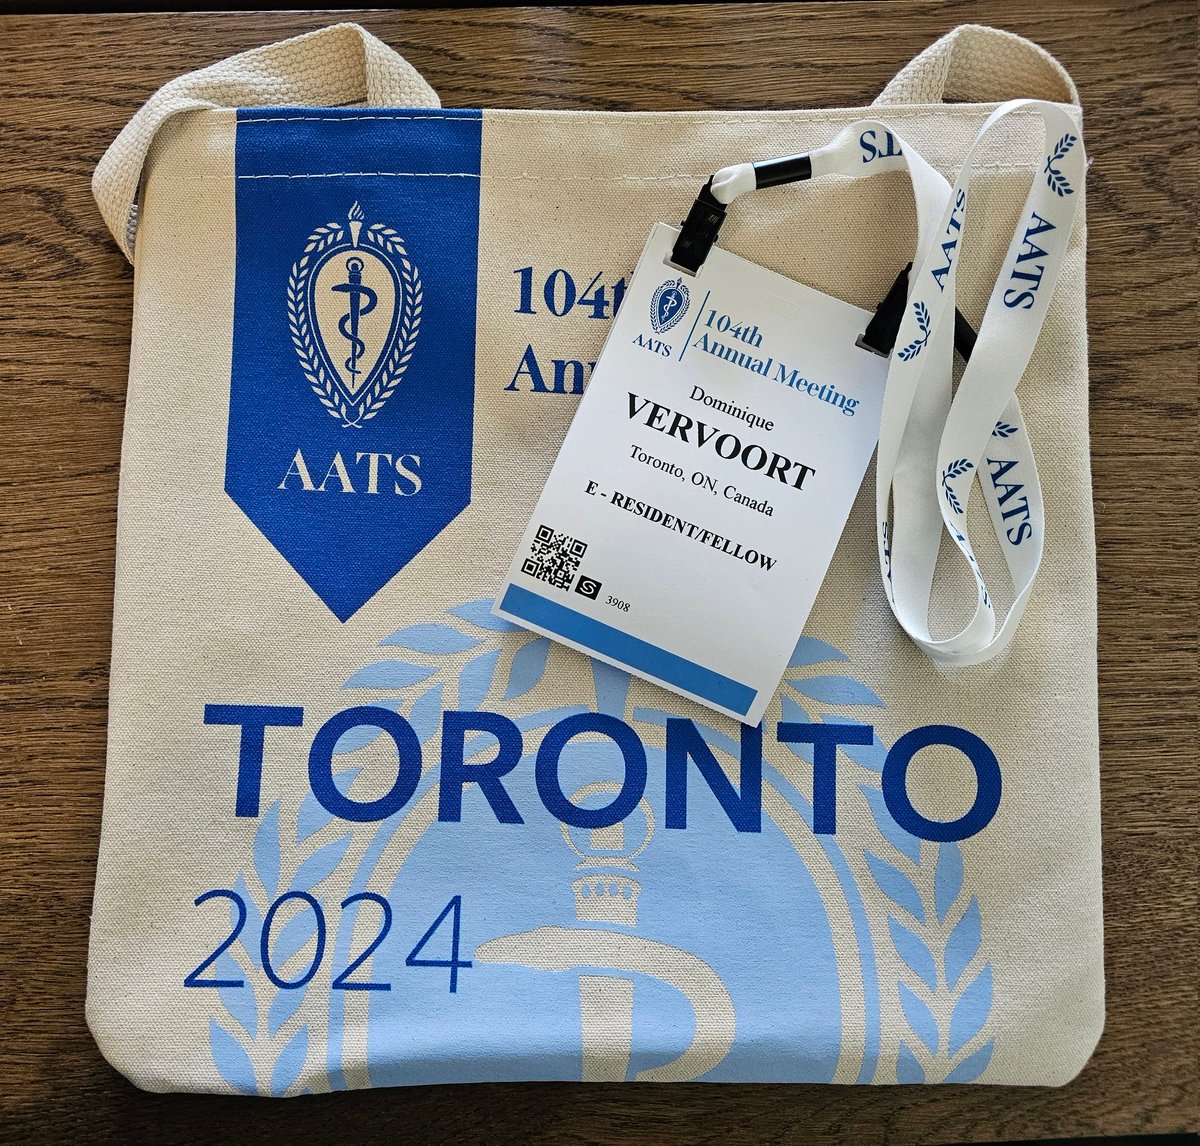 Let's get this #AATS2024 party started! Exciting to see the #CTSurgery world come to our very own Toronto 🇨🇦 for 4 days filled with the latest and greatest of 🫀🫁 surgery! @AATSHQ @UofTCVsurgery